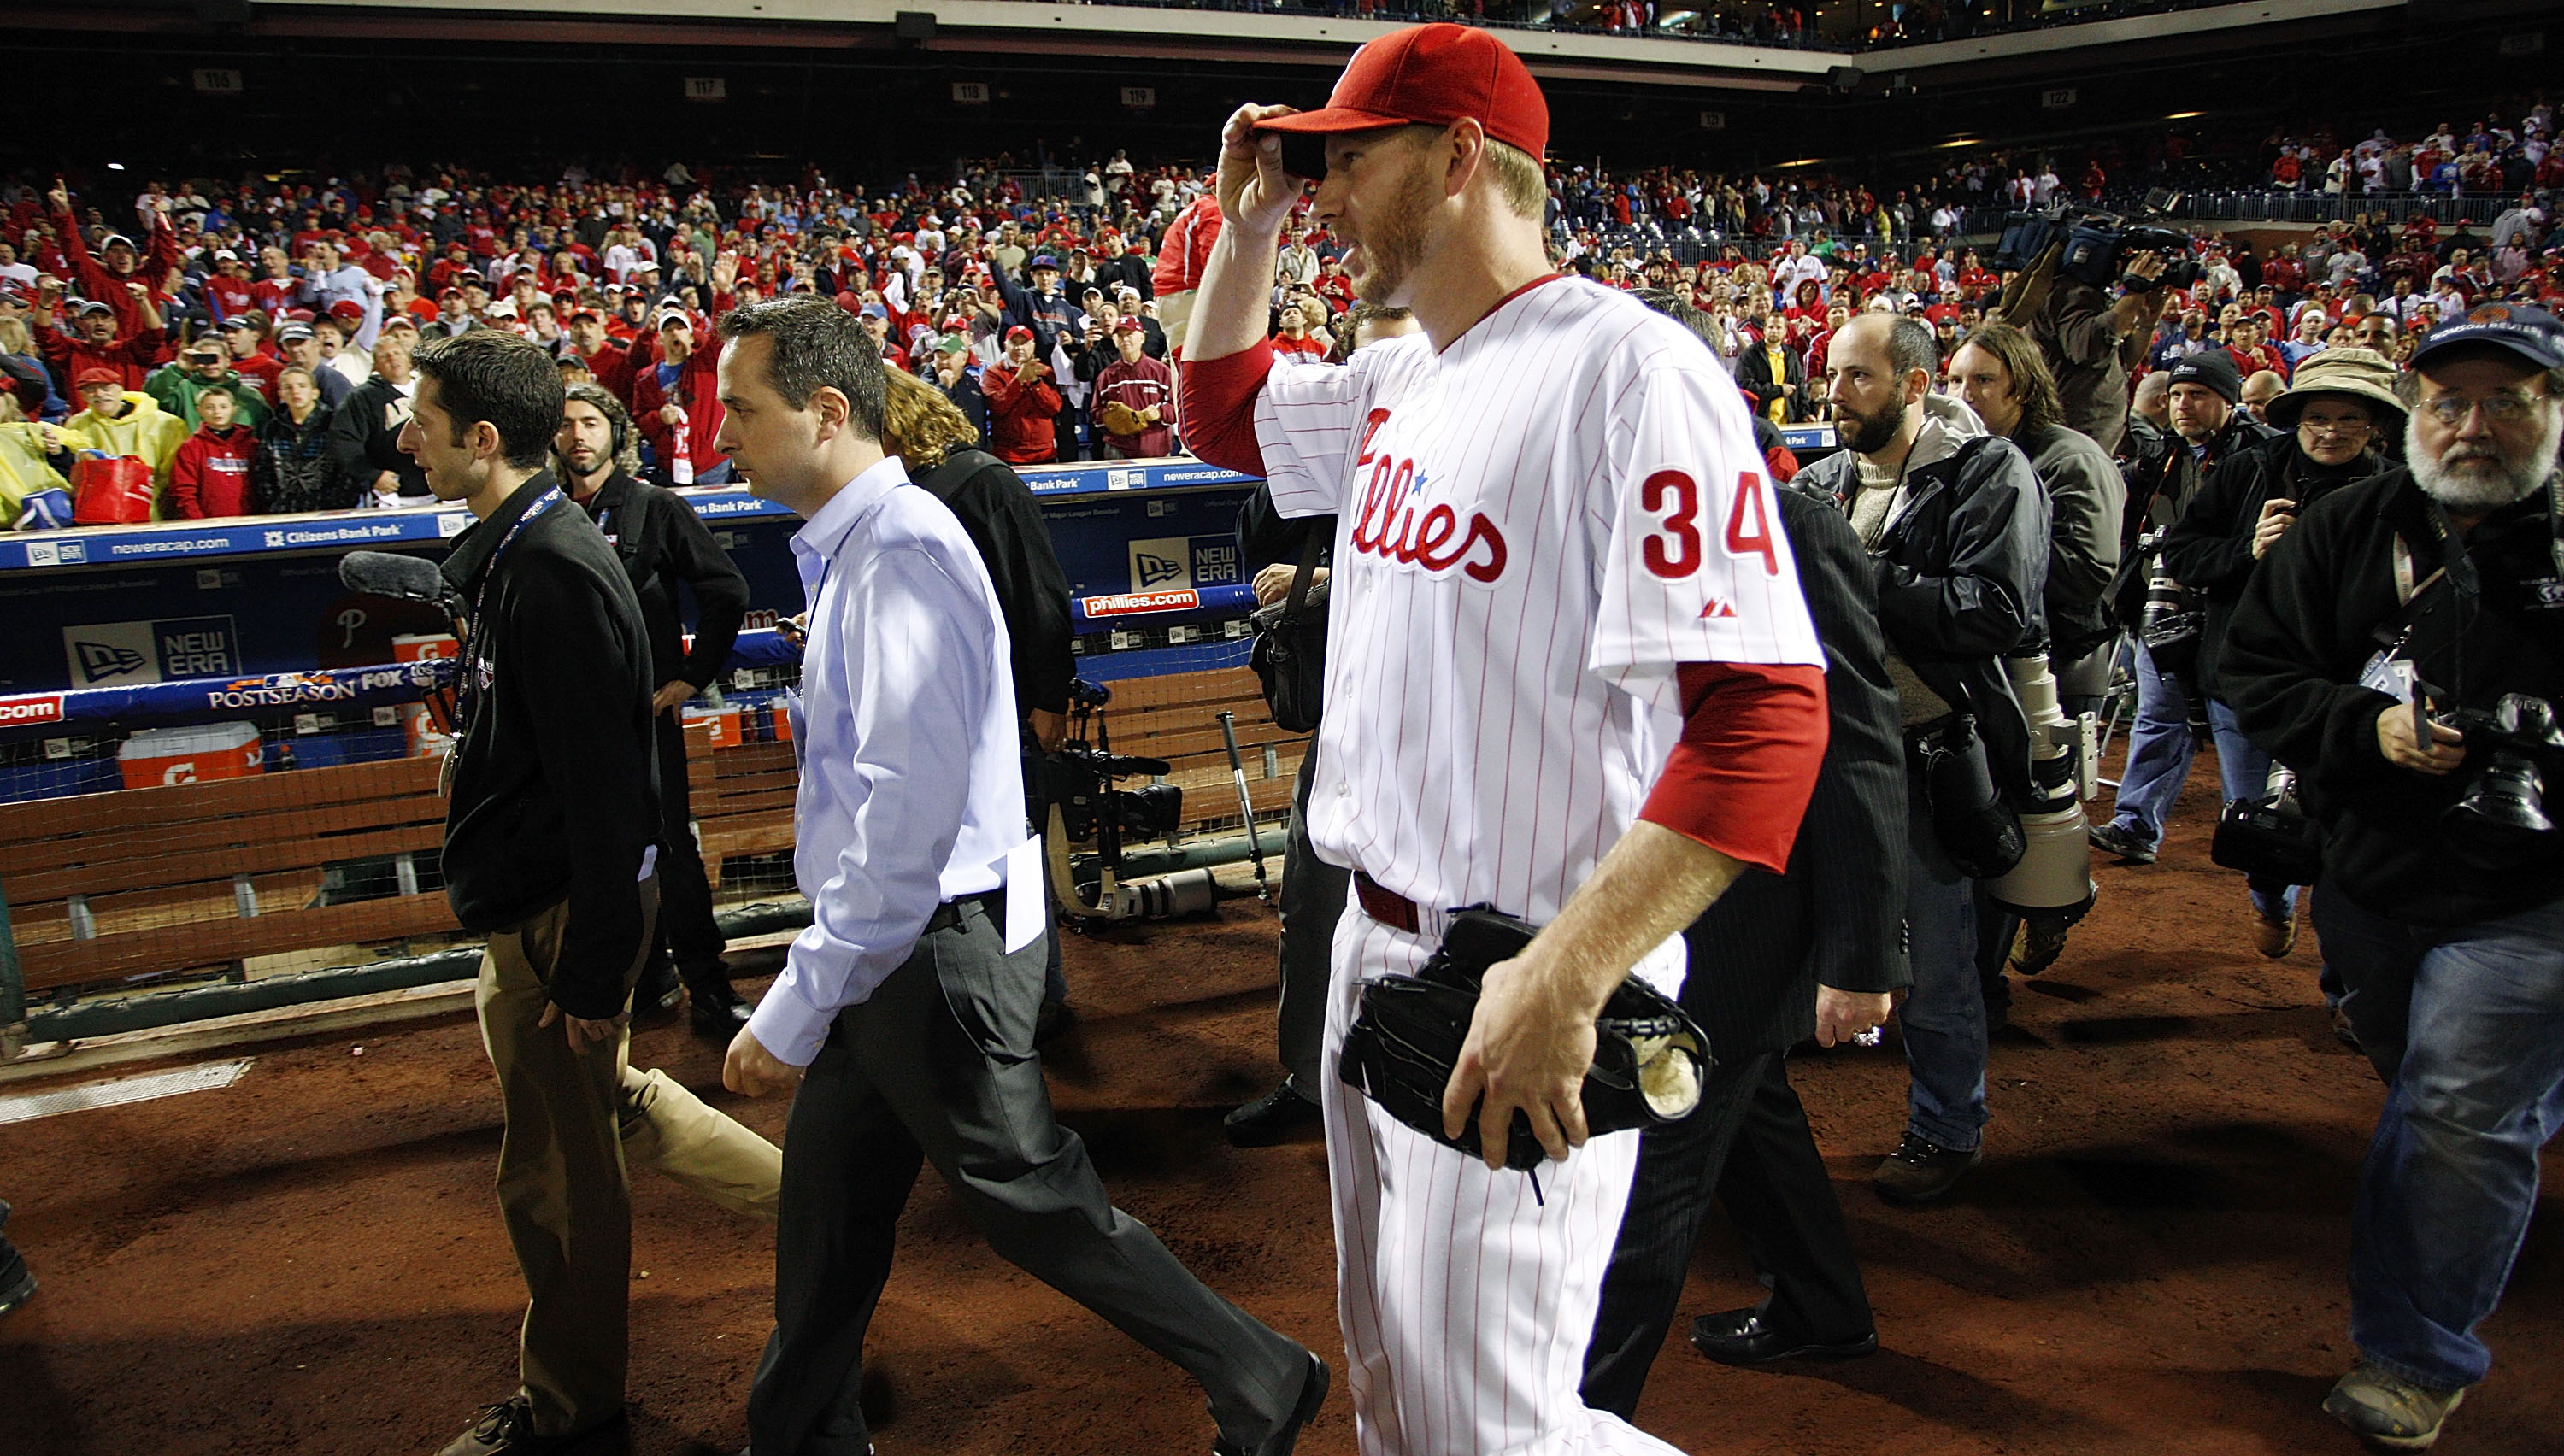 Phillies World Series history, from Grover Cleveland Alexander to Brad Lidge